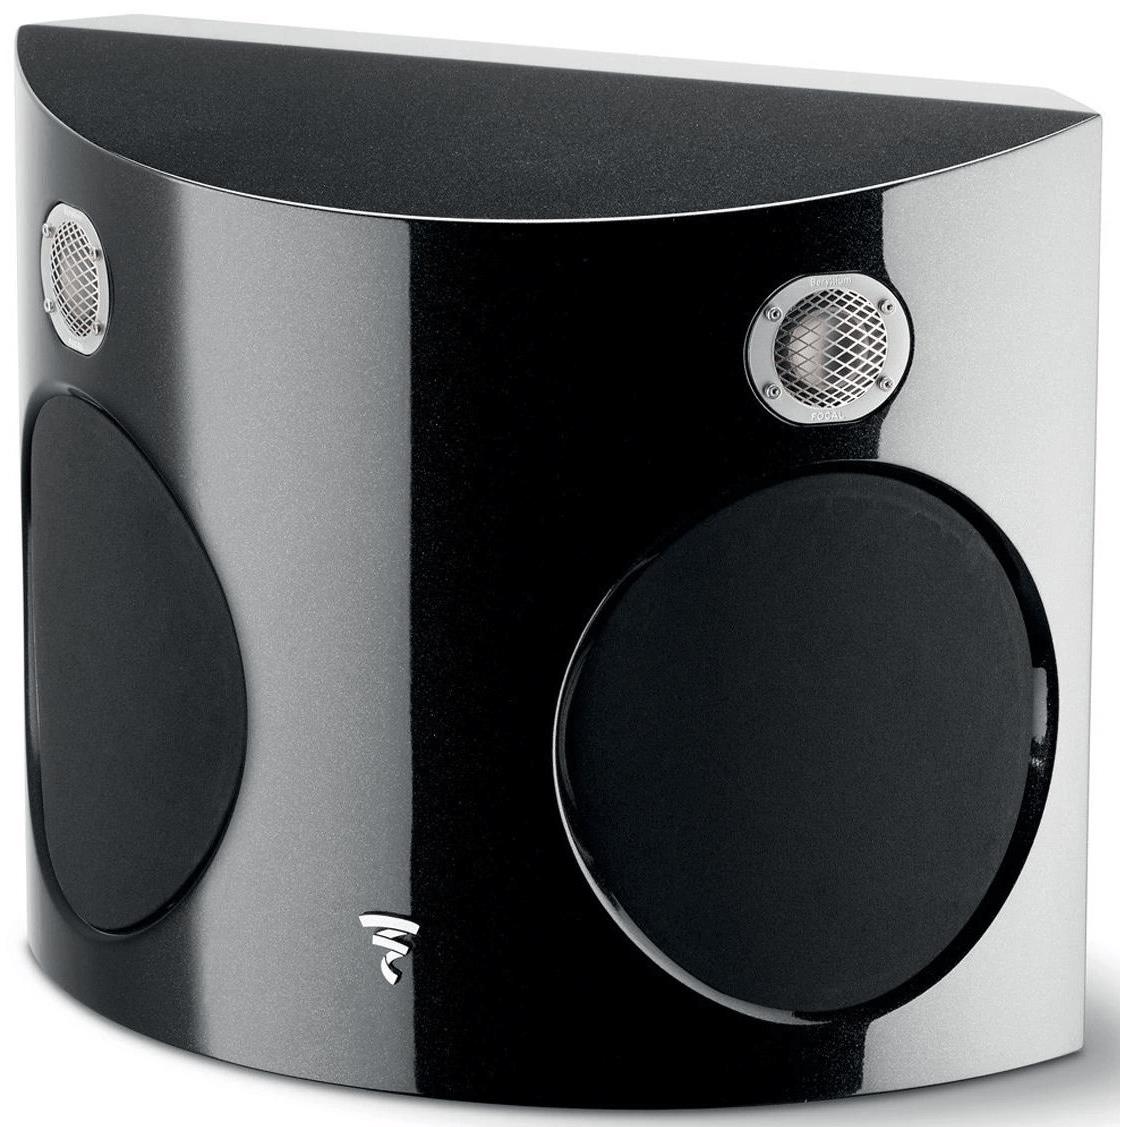 Focal Sopra Surround BE Black Lacquer 2-Way Surround Loudspeakers - JMLSURR-BE-BK - Focal-JMLSURR-BE-BK